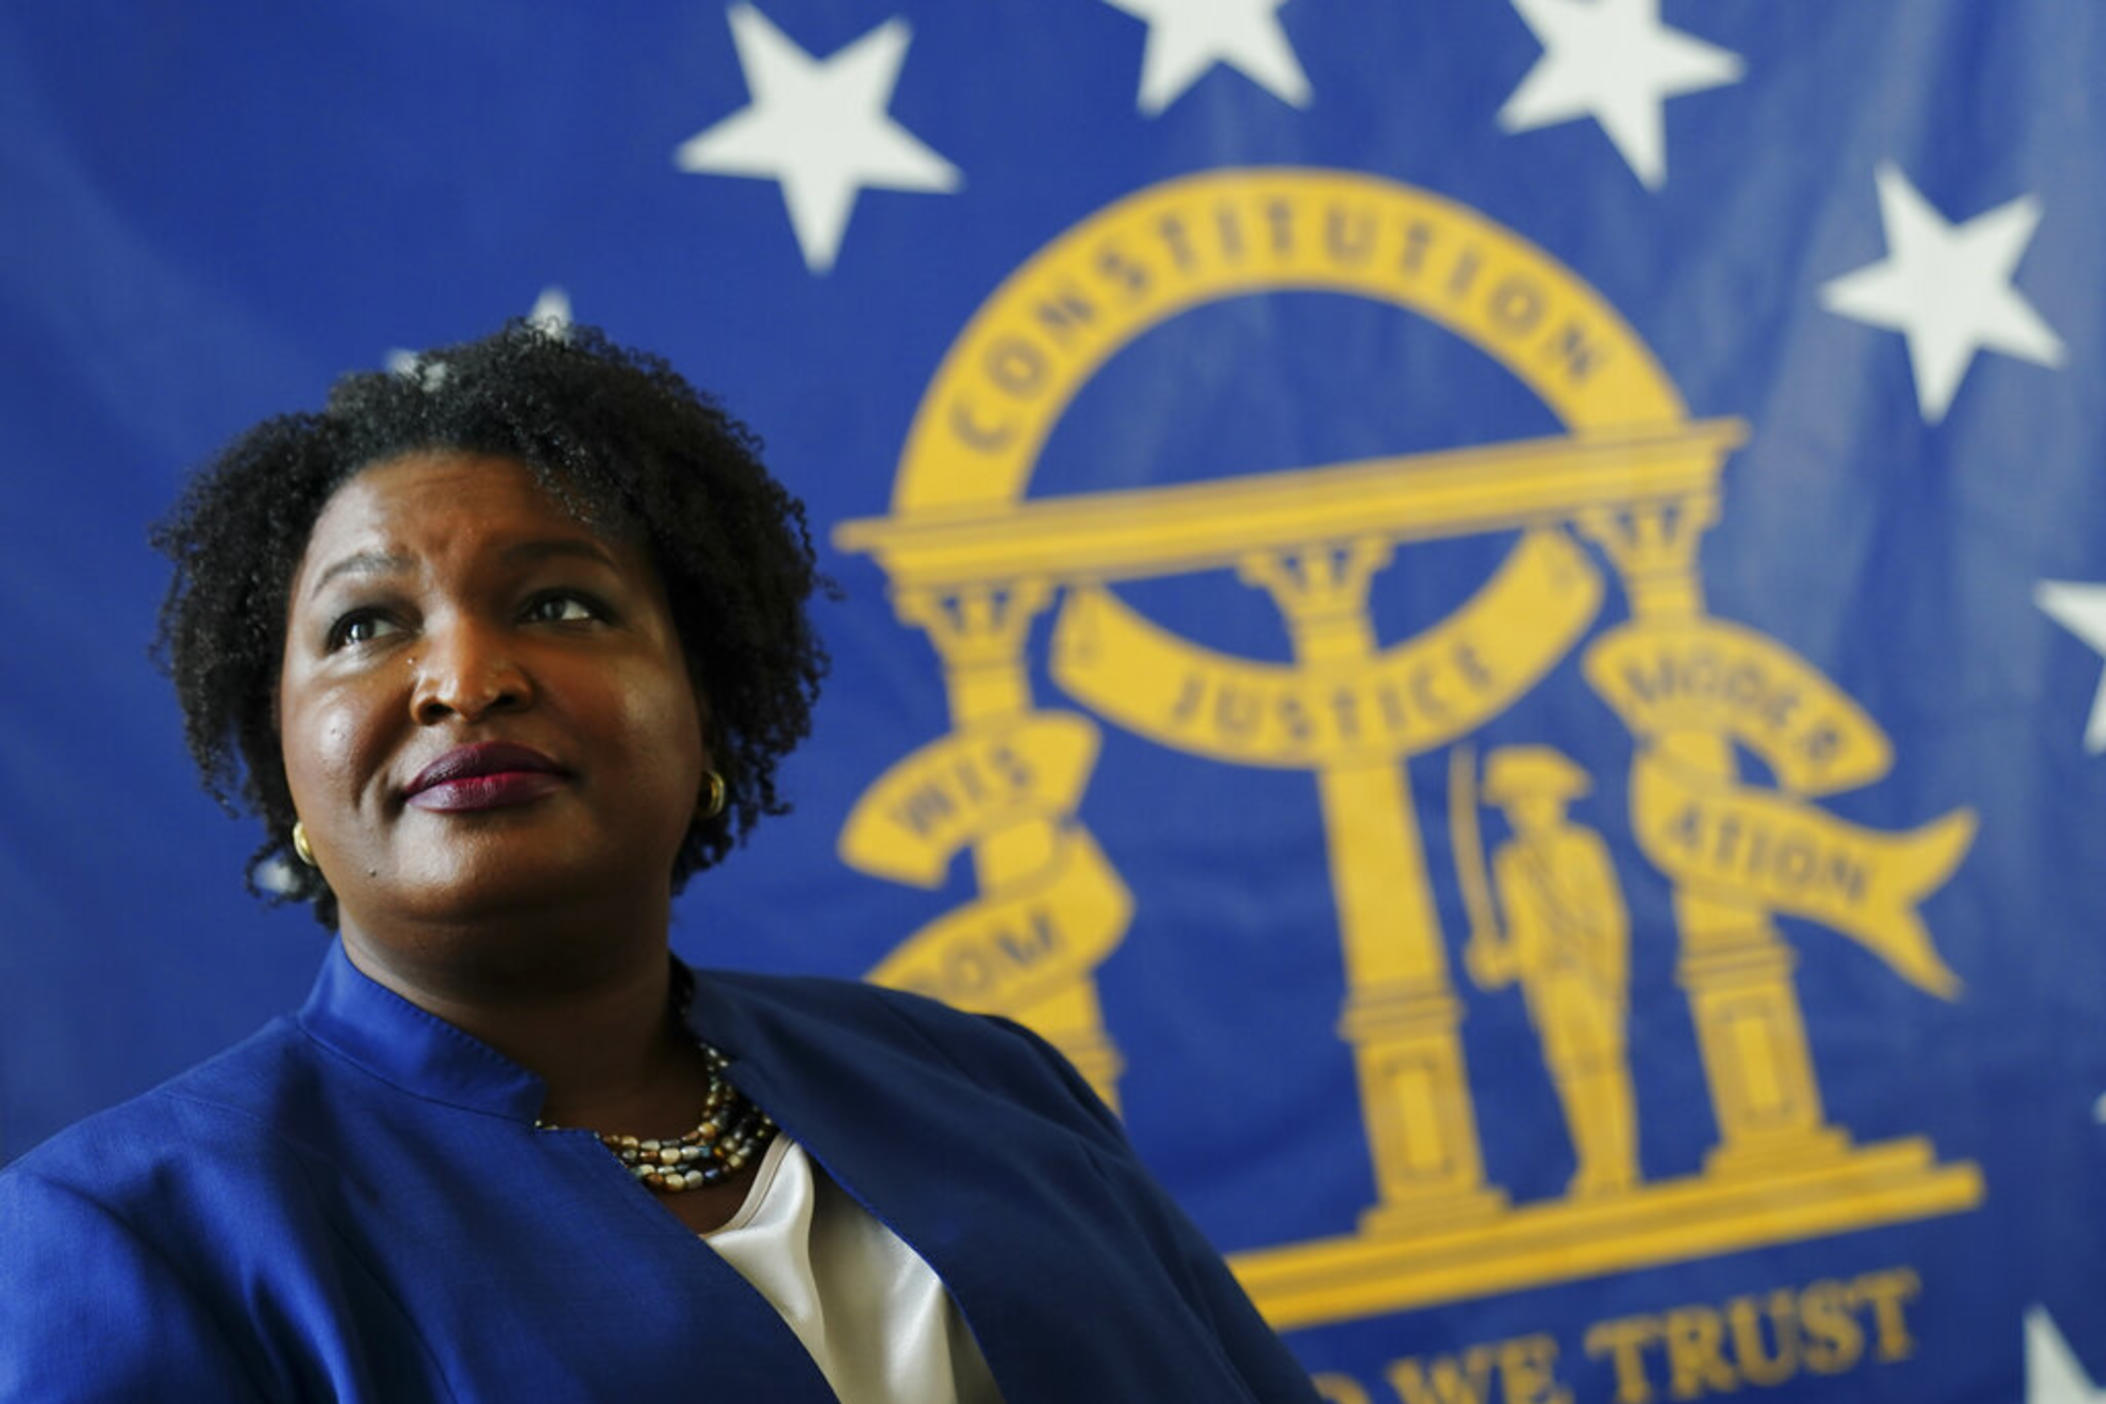 Democratic candidate for Georgia Governor Stacey Abrams poses for a portrait in front of the State Seal of Georgia Monday, Aug. 8, 2022, in Decatur, Ga.